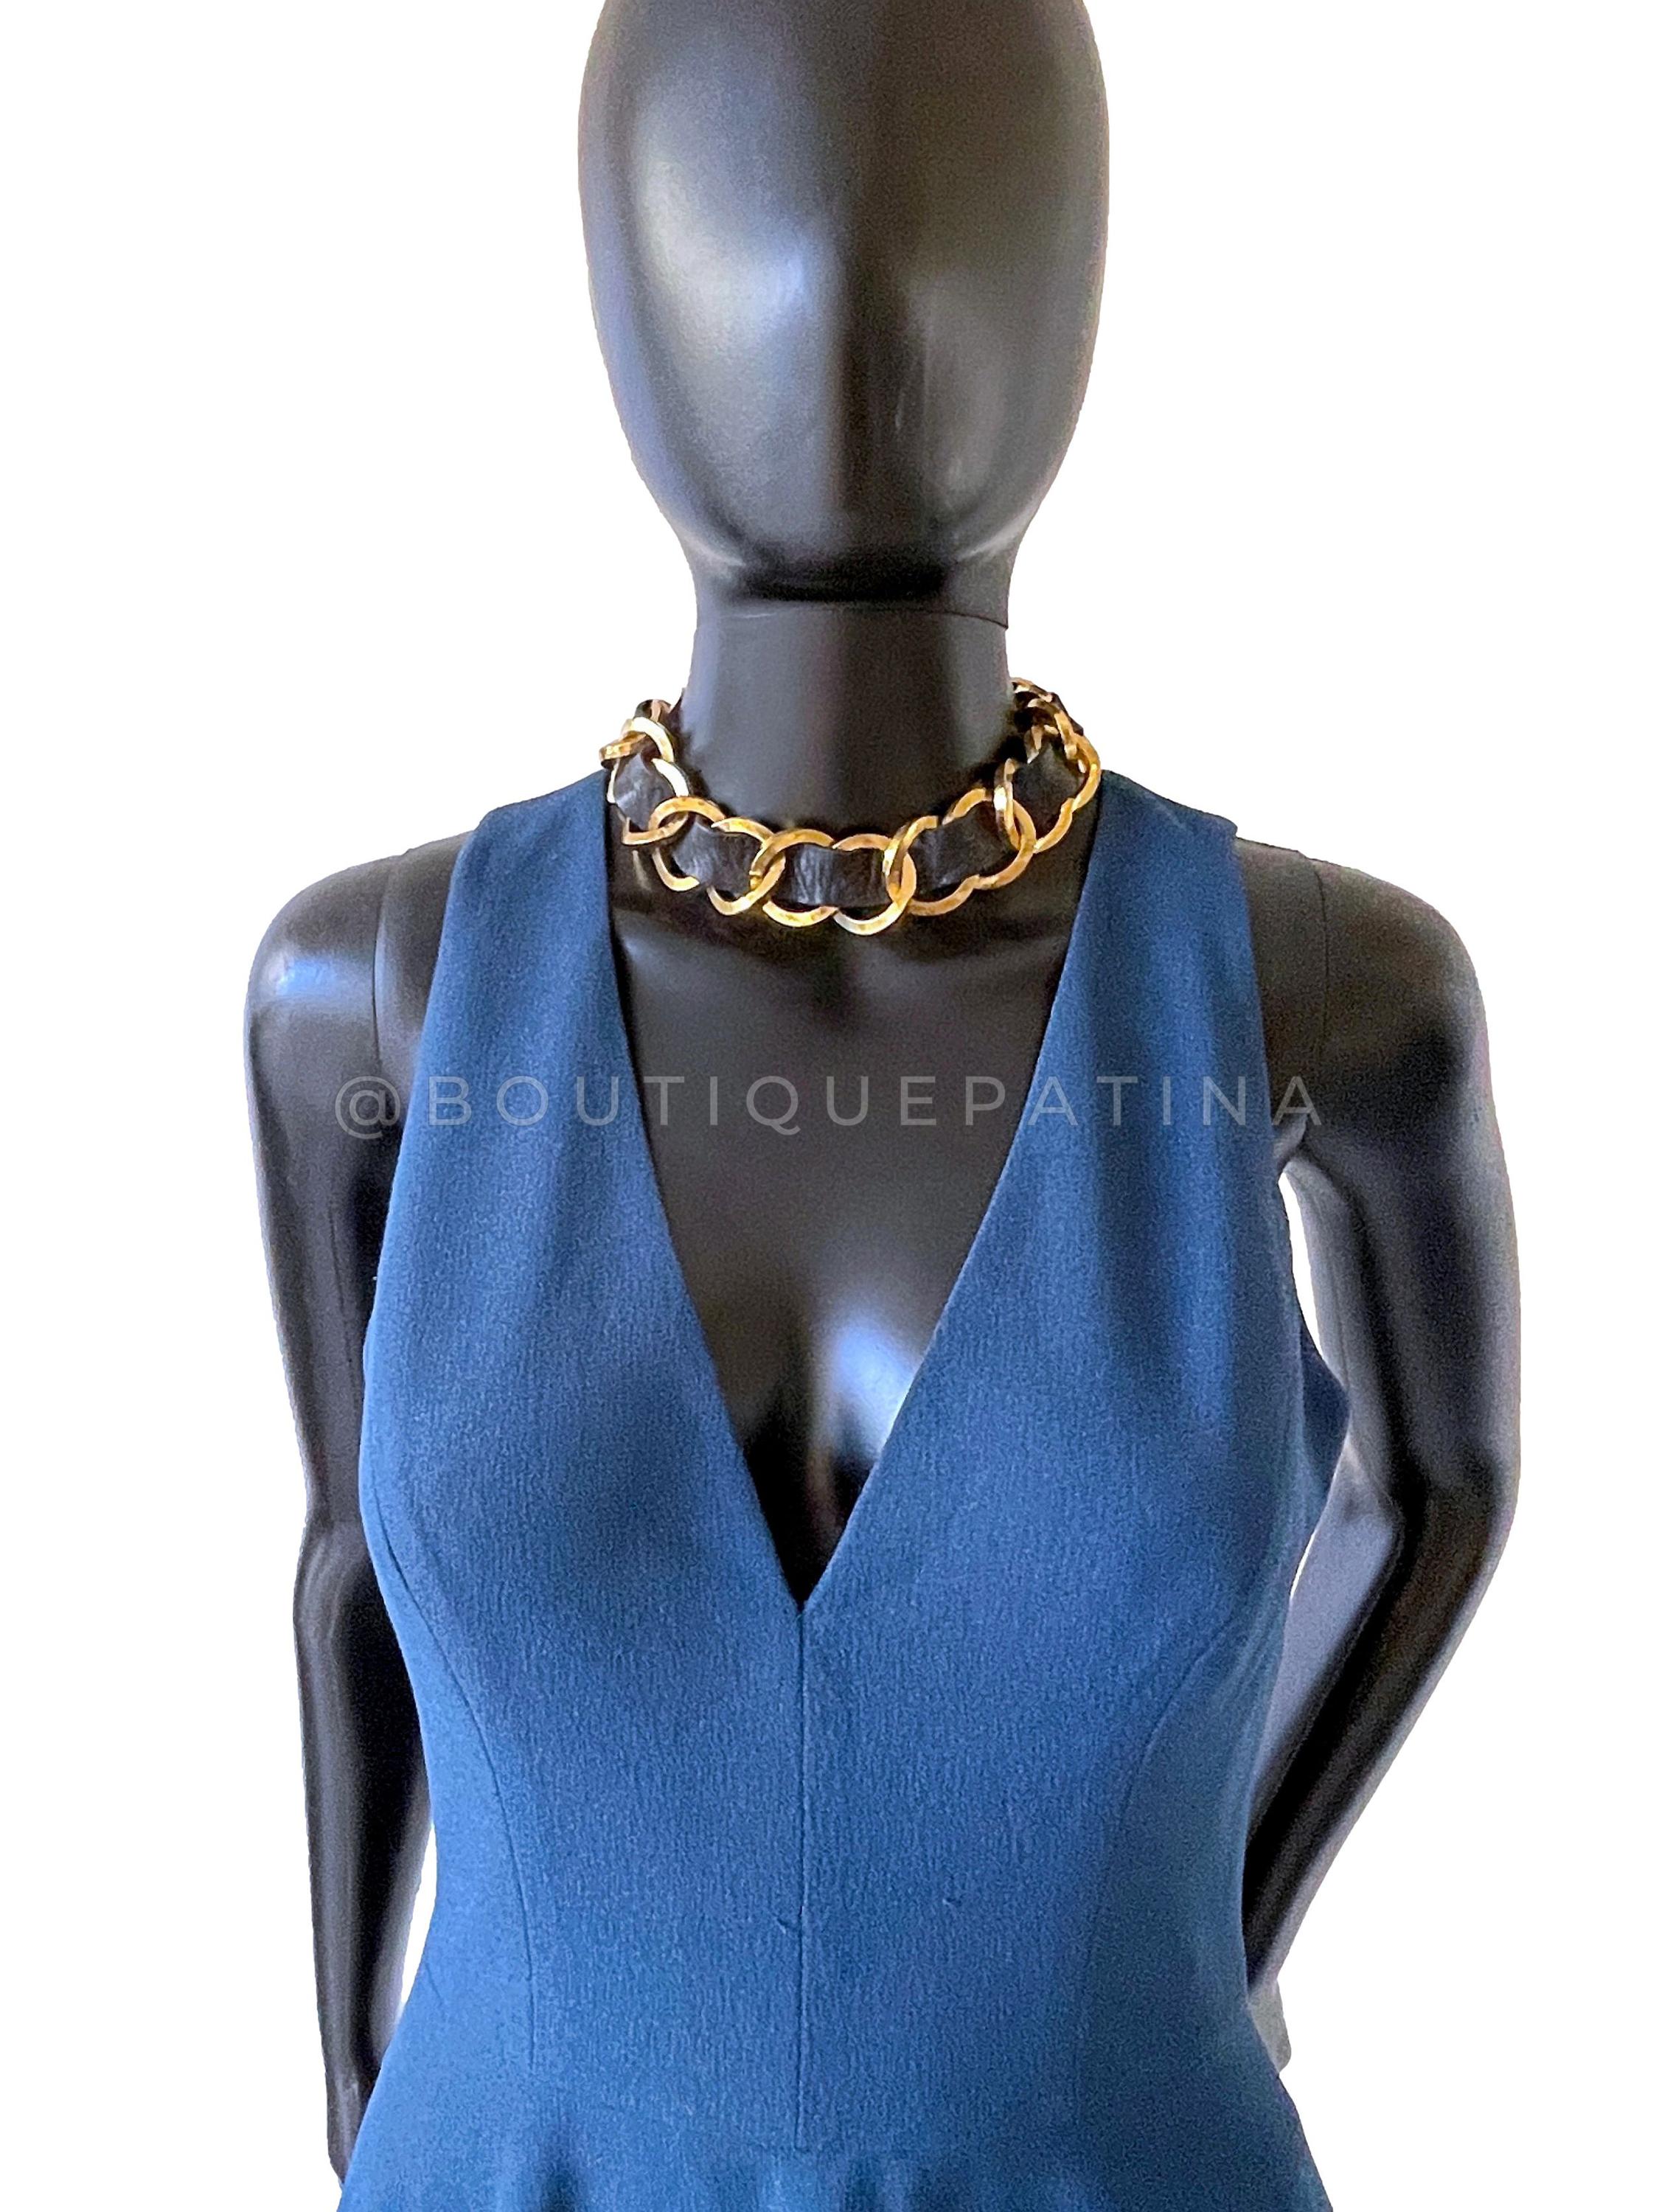 Rare Chanel Vintage Collection 26 Chunky Woven Chain Choker Necklace 66845 For Sale 1